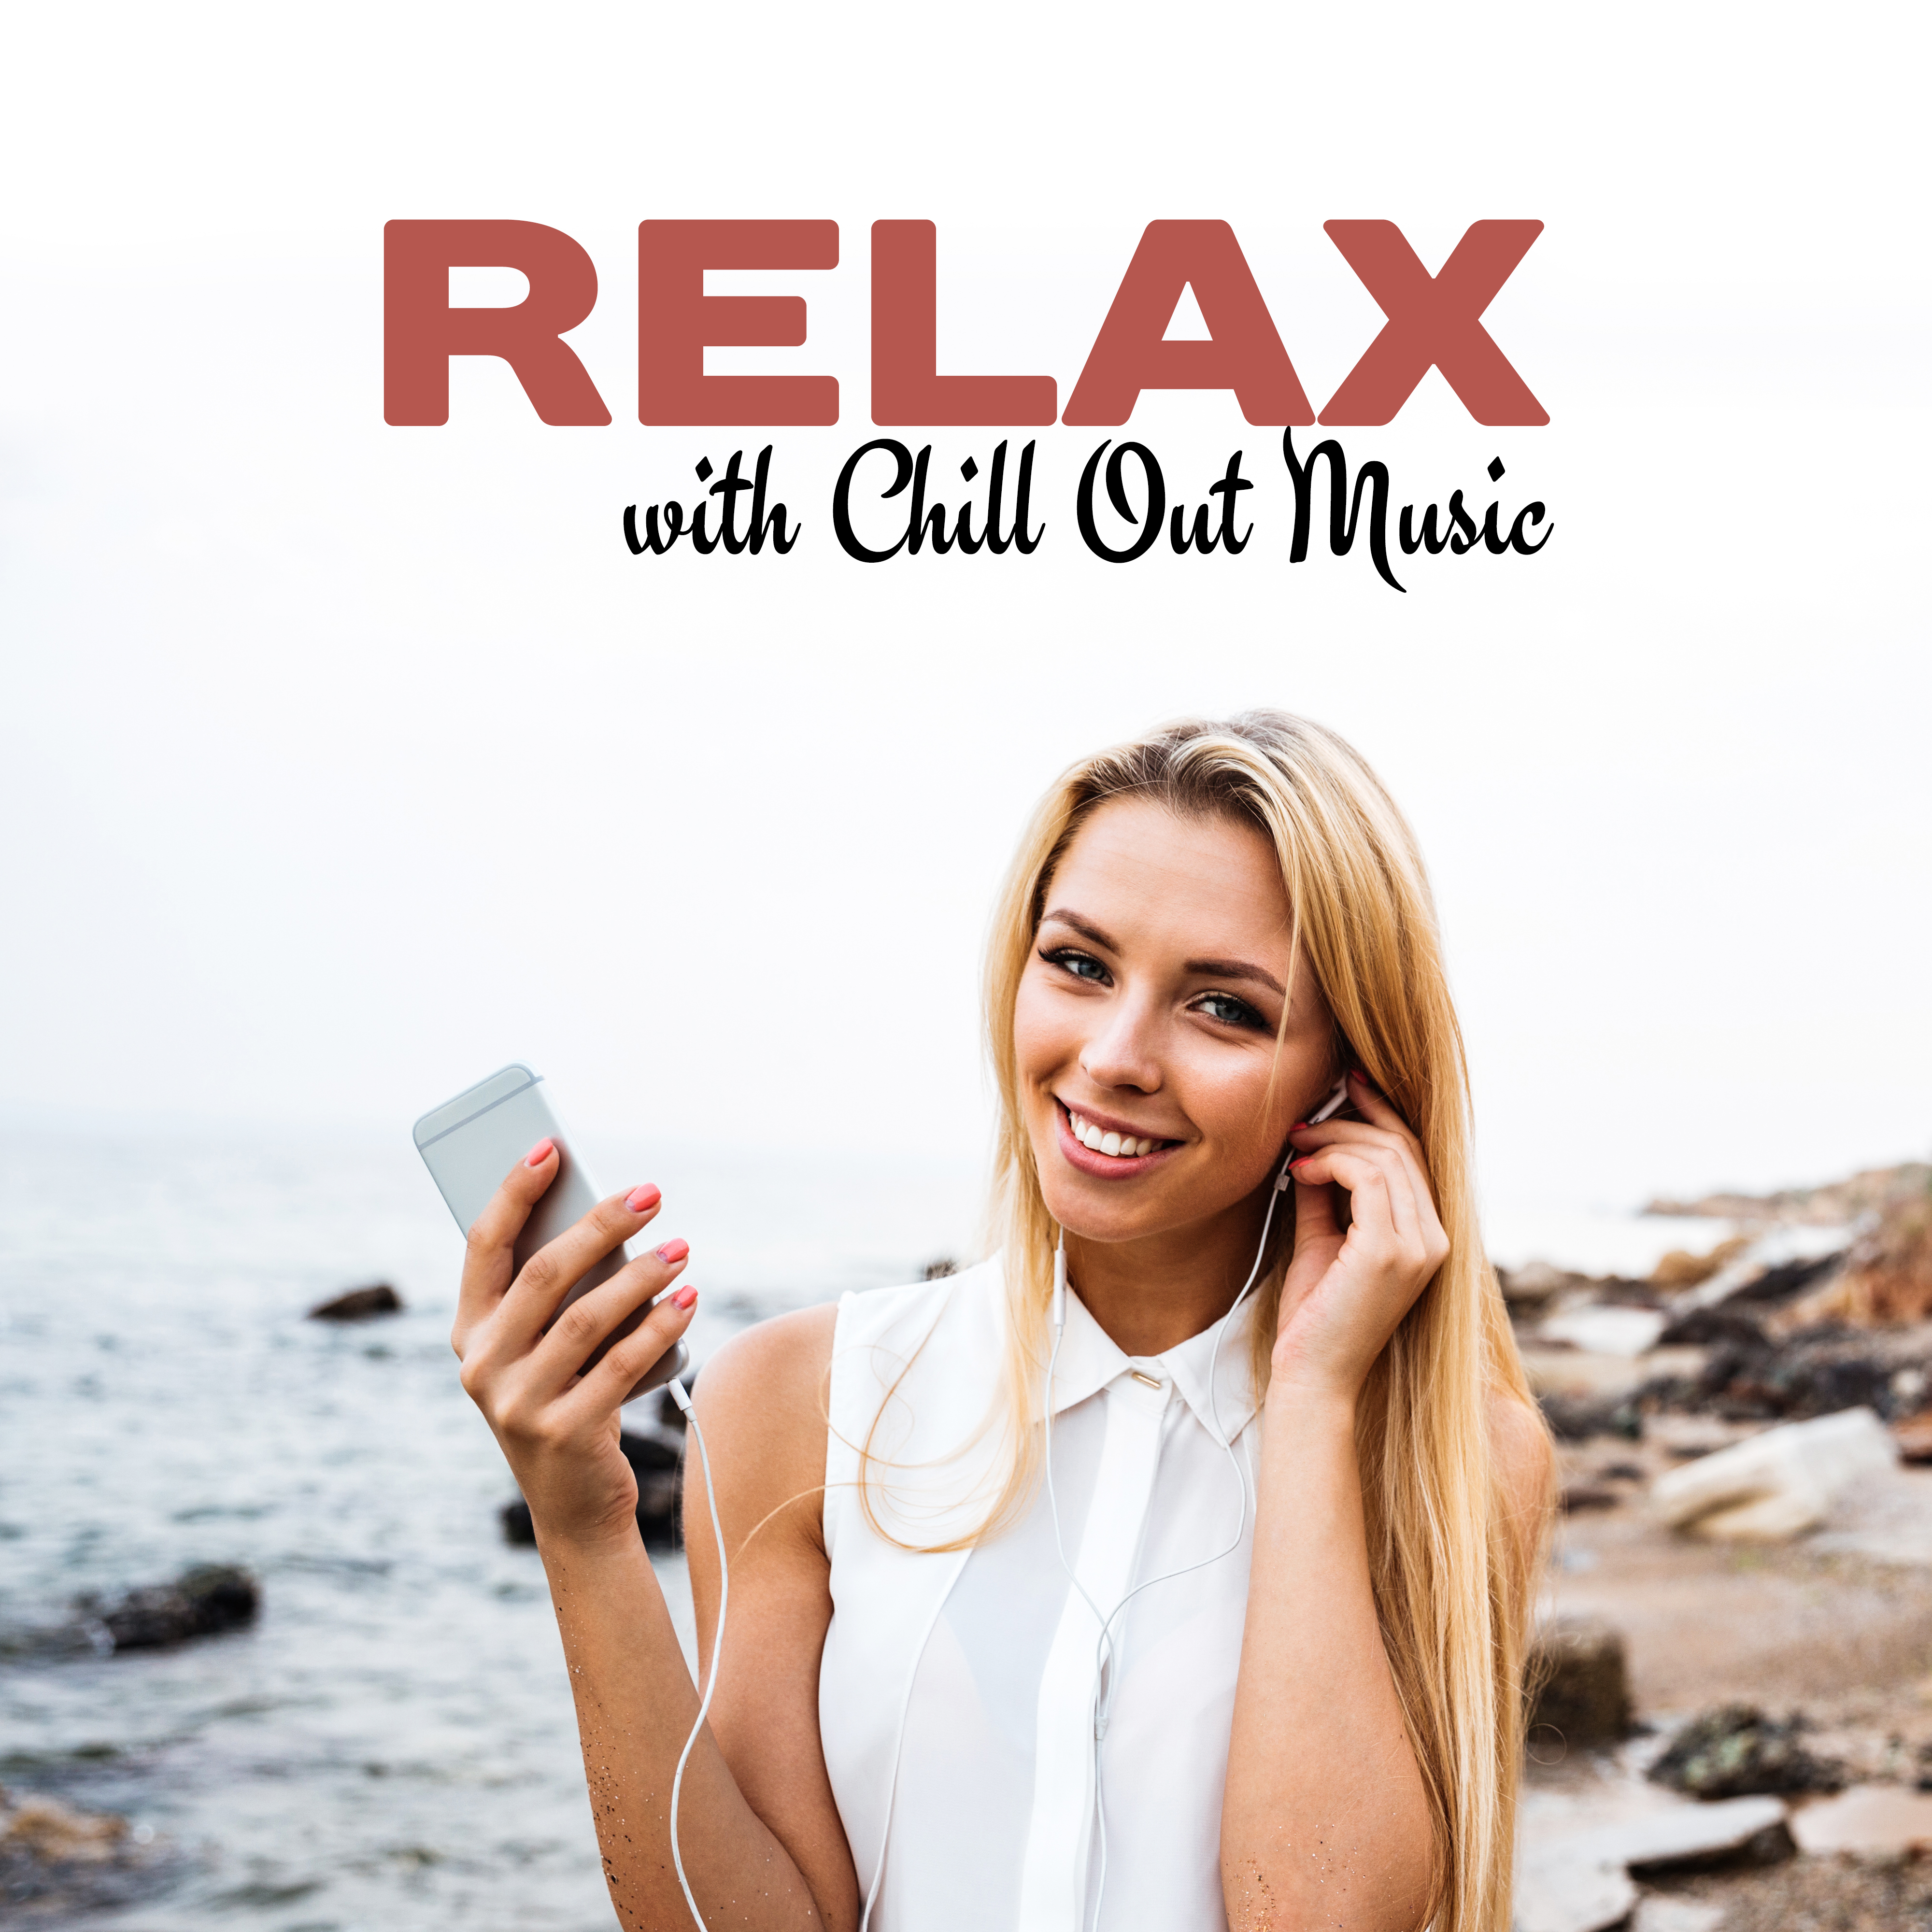 Relax with Chill Out Music  Summer 2017, Ibiza Relaxing Vibes, Holiday Relaxation, Peaceful Beach Music